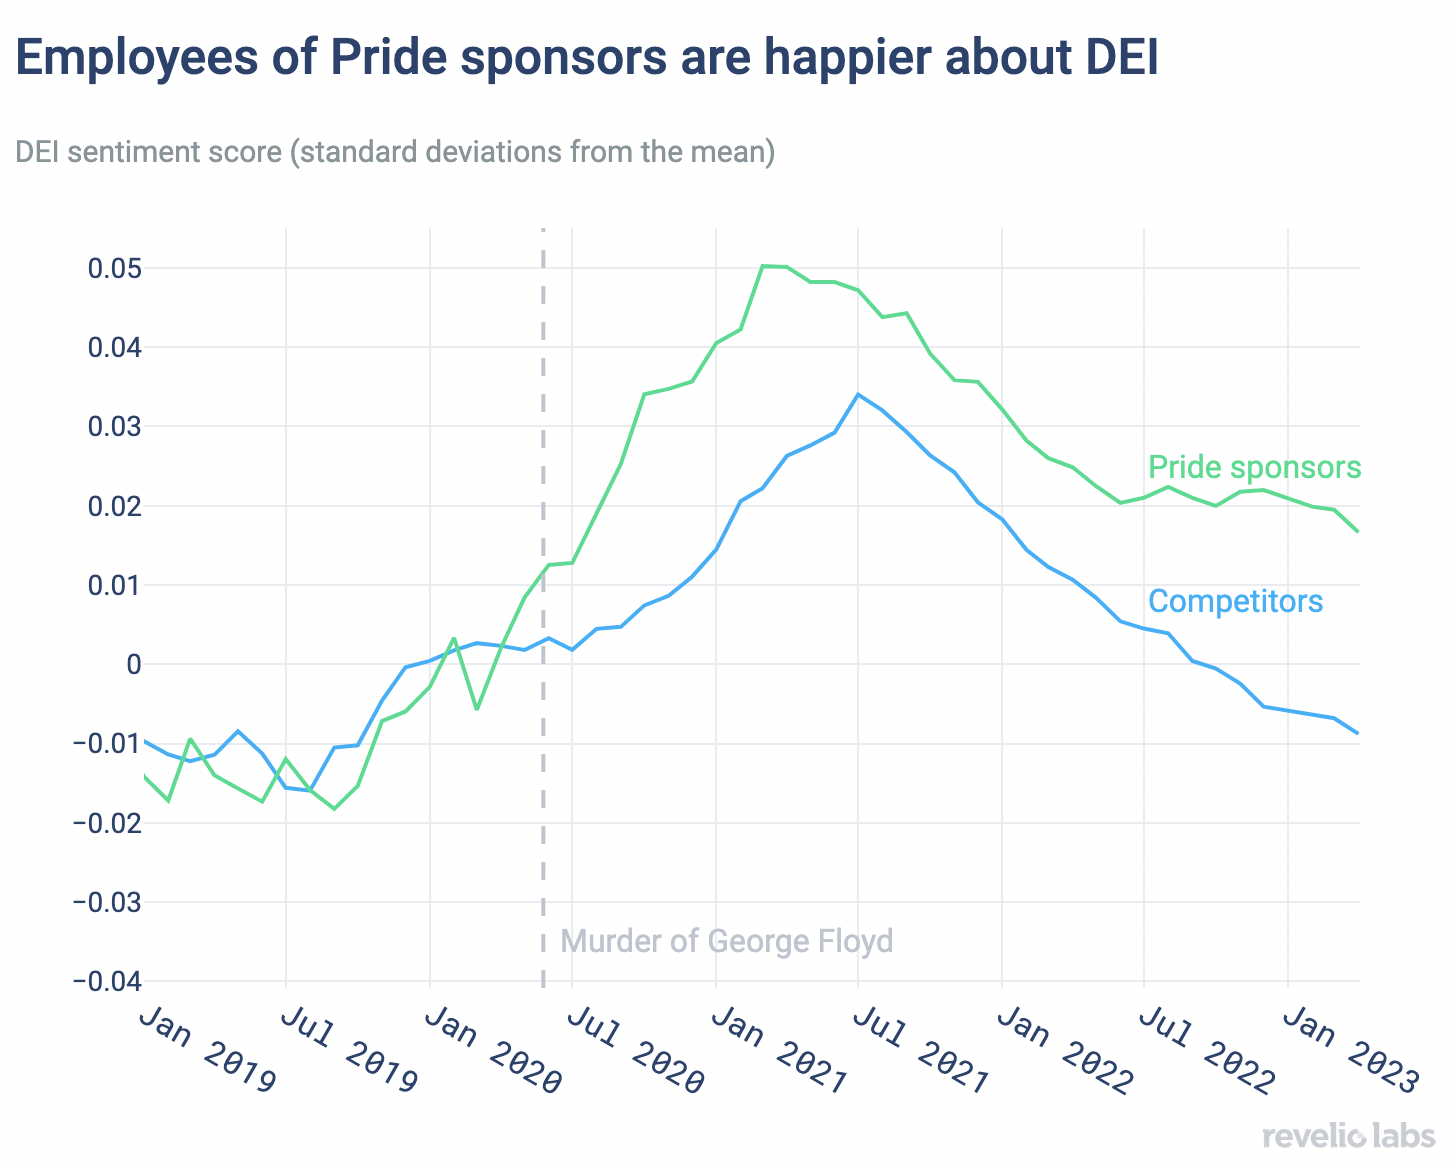 Employees of Pride sponsors are happier about DEI